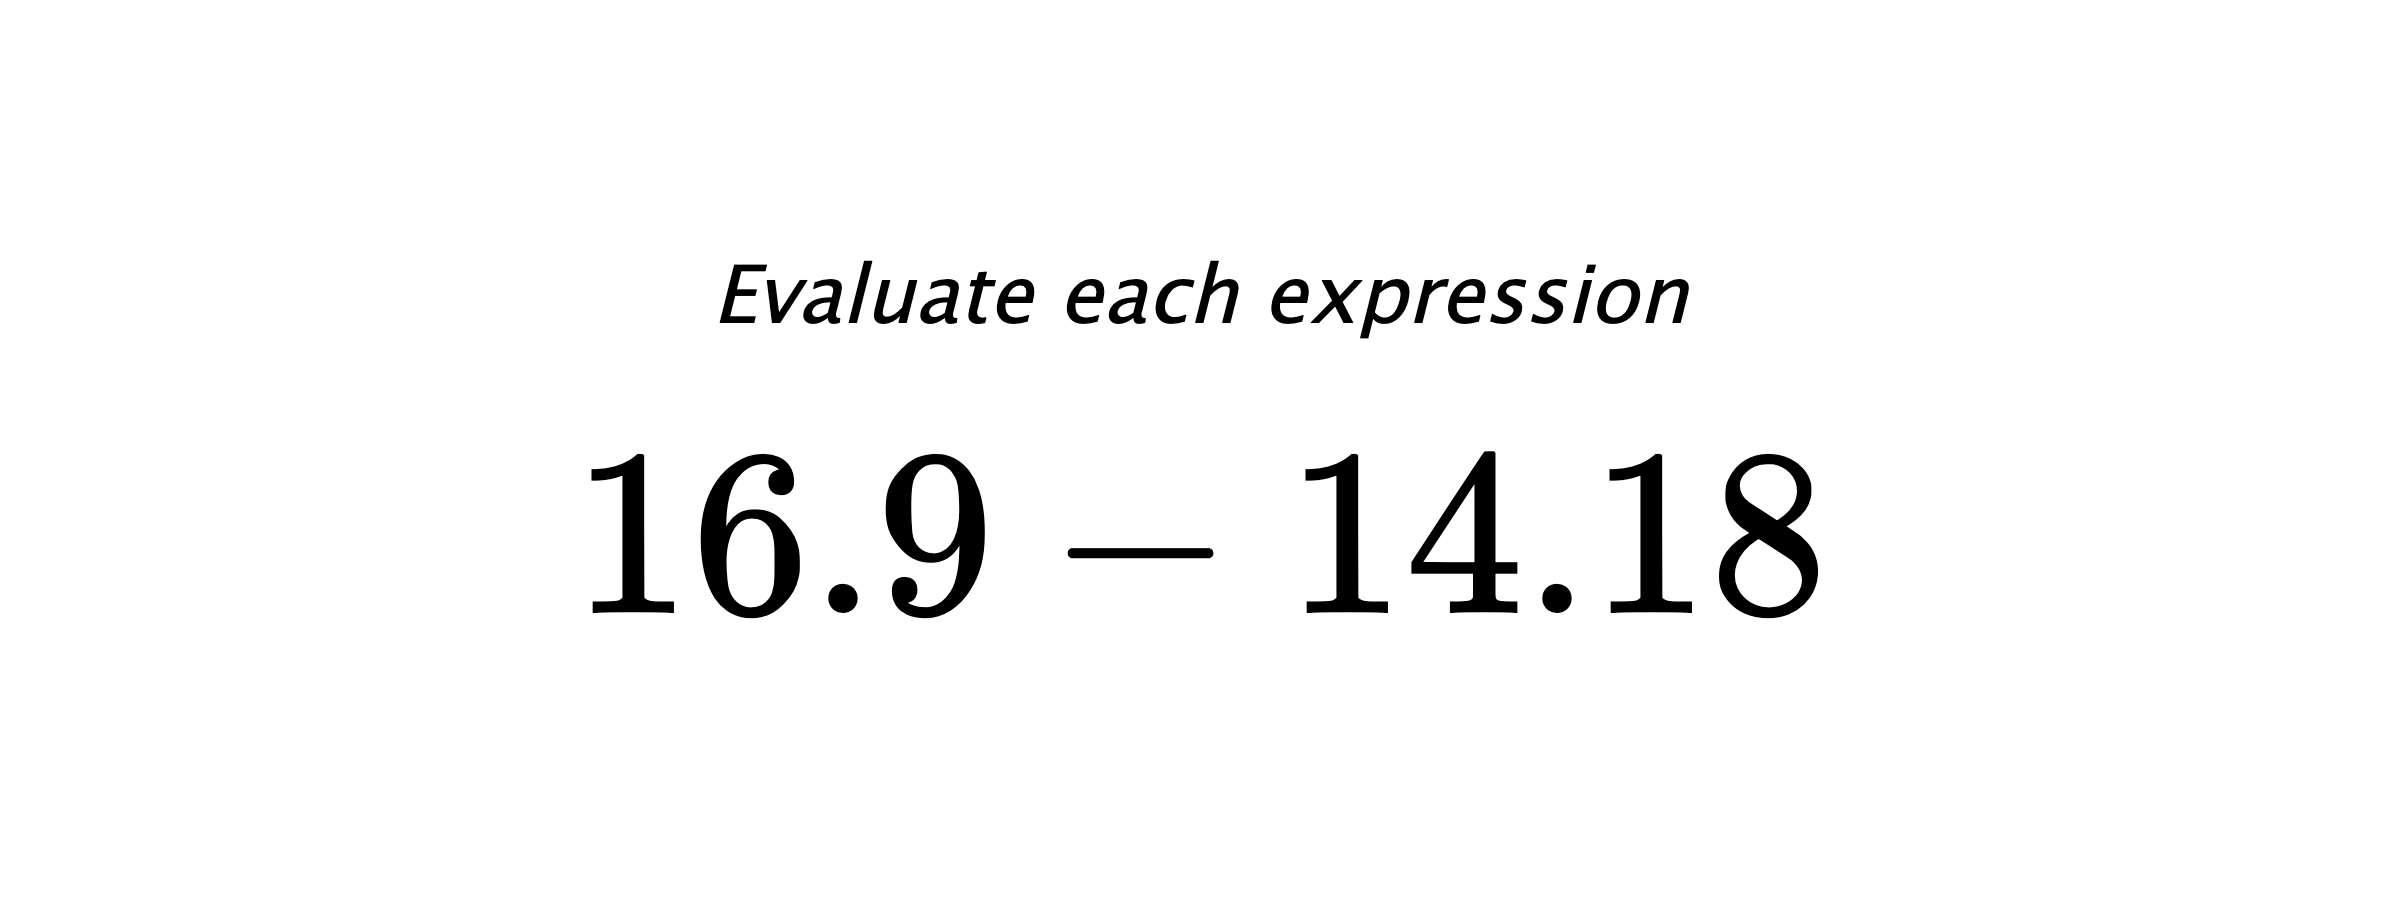 Evaluate each expression $ 16.9-14.18 $